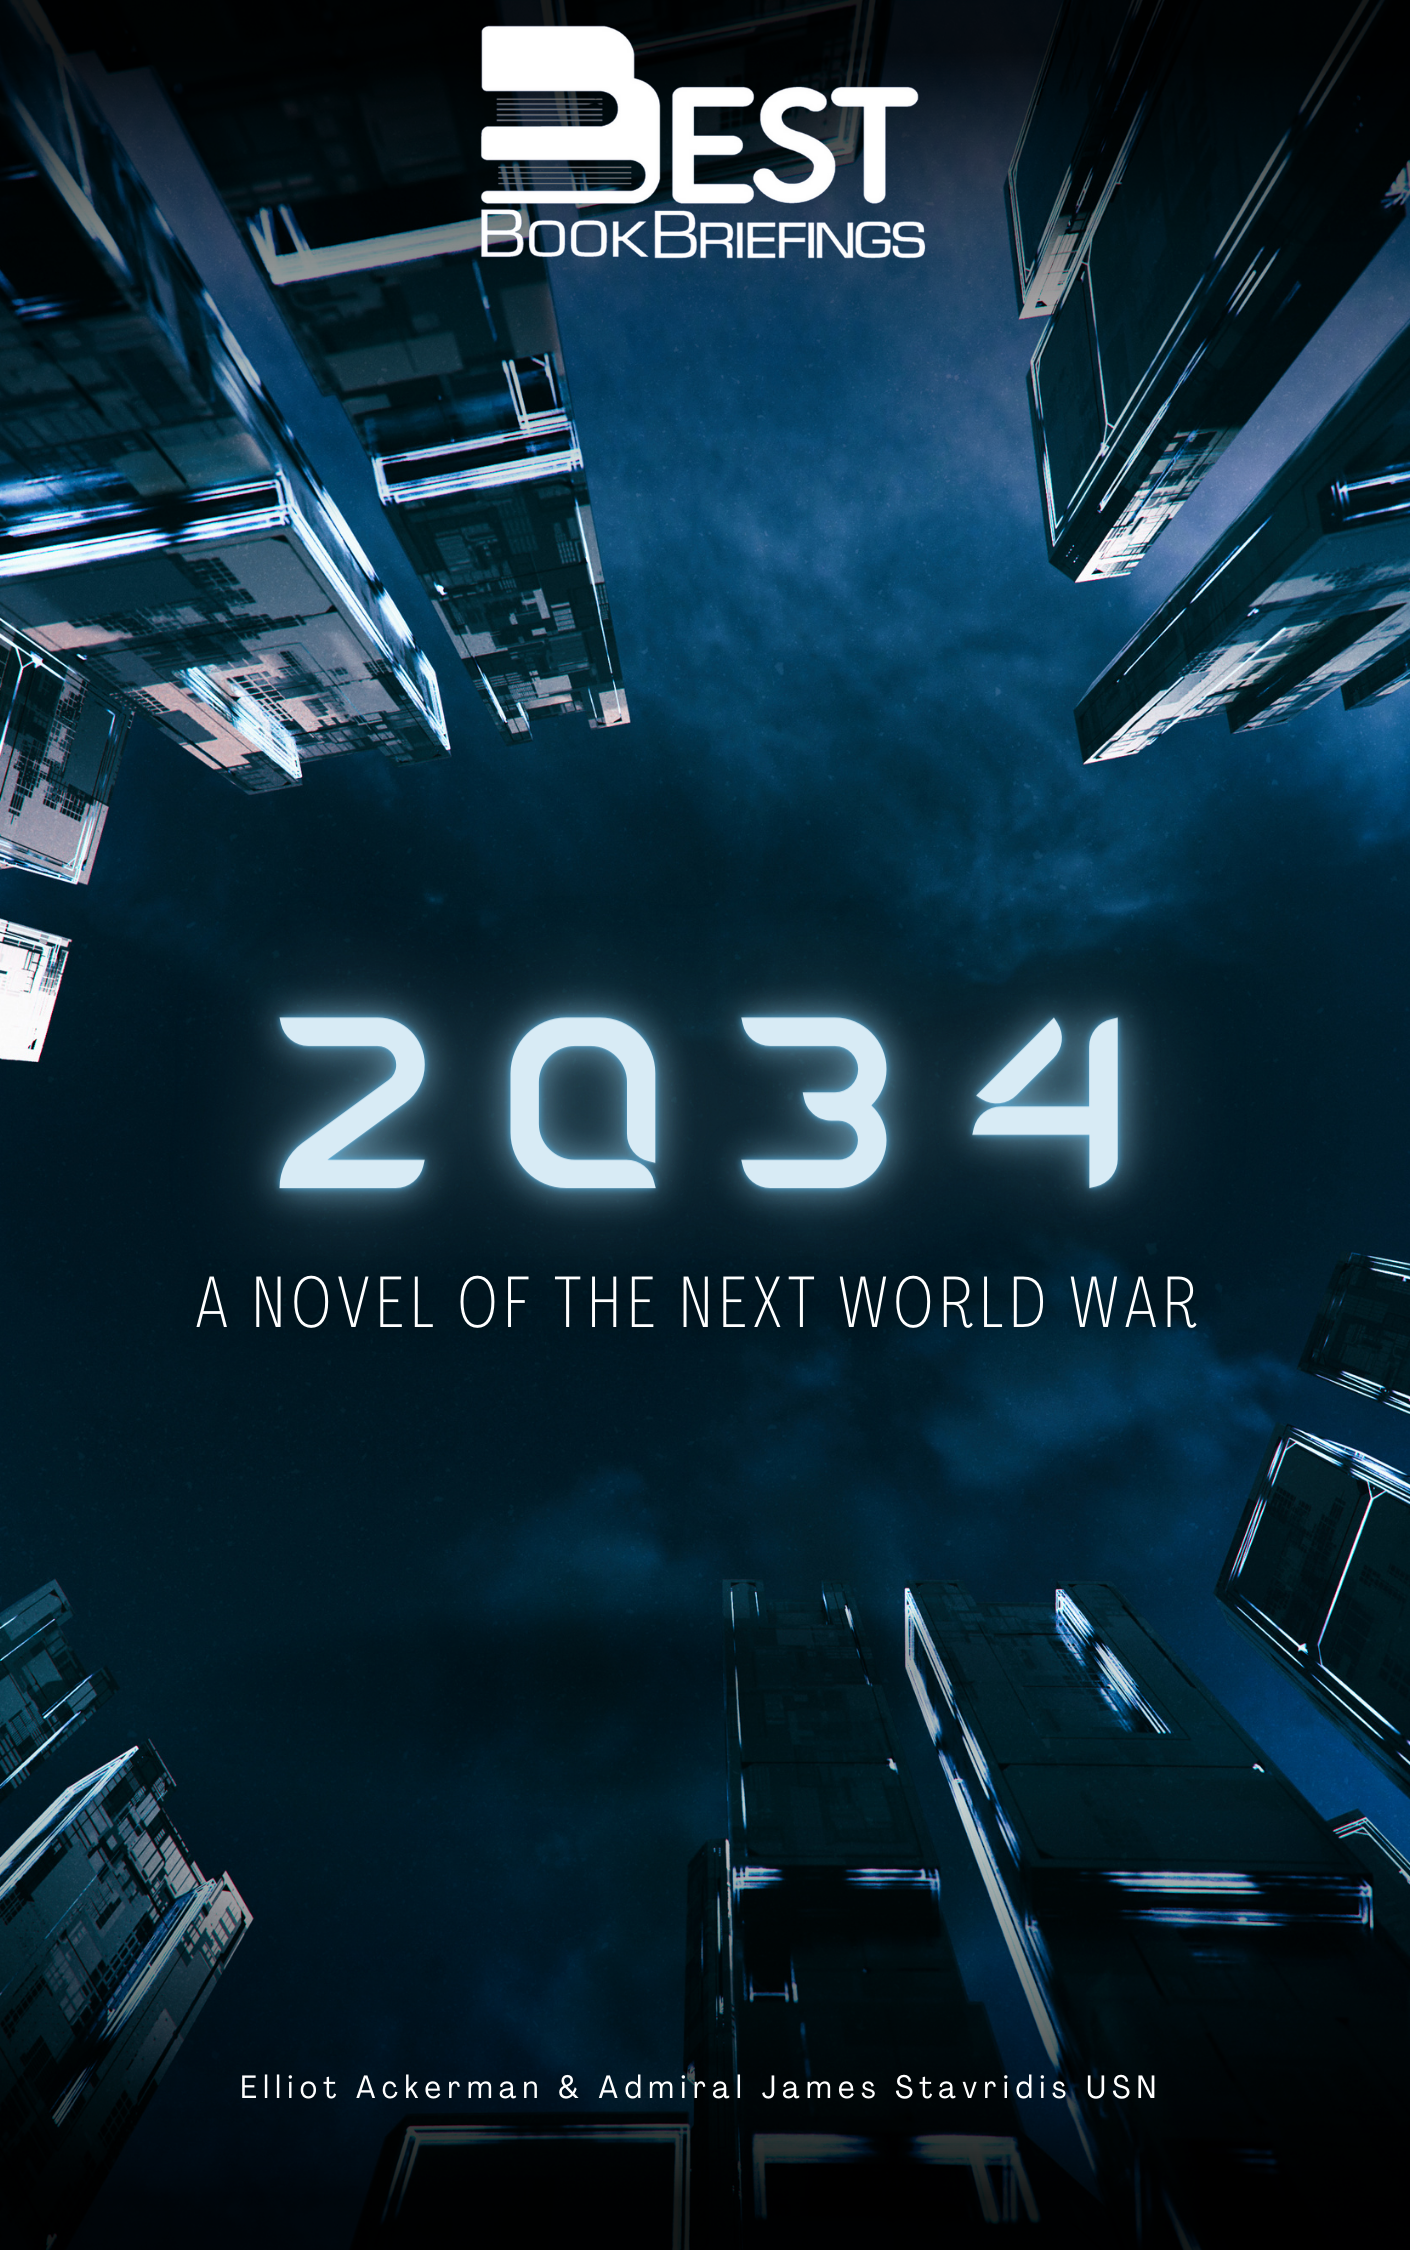 Everything in 2034 is an imaginative extrapolation from present-day facts on the ground combined with the authors' years working at the highest and most classified levels of national security. Sometimes it takes a brilliant work of fiction to illuminate the most dire of warnings: 2034 is all too close at hand, and this 